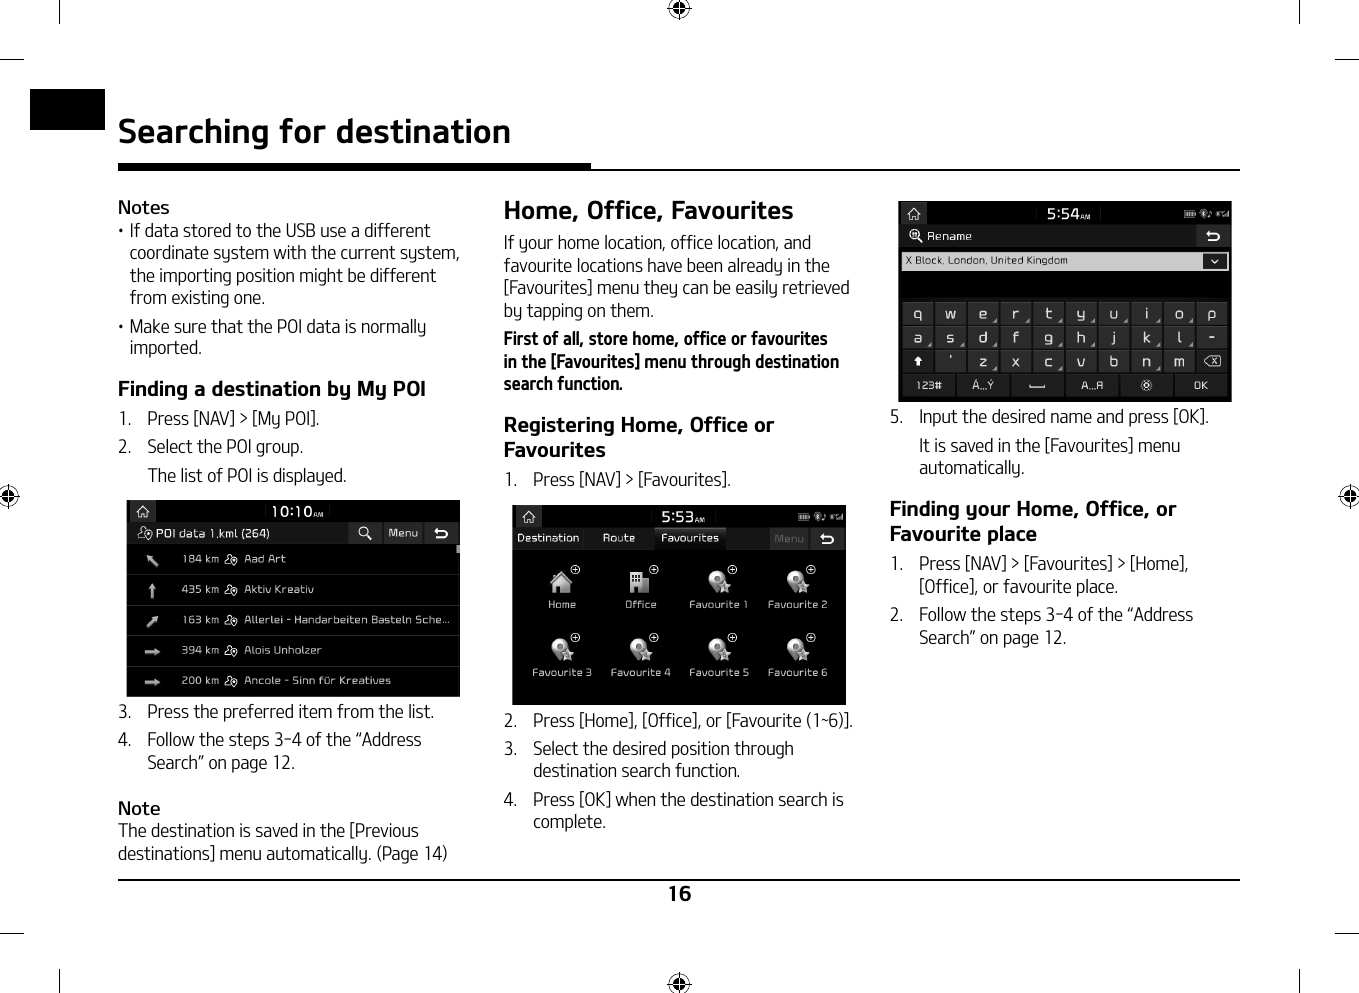 16Searching for destinationNotes䳜 If data stored to the USB use a different coordinate system with the current system, the importing position might be different from existing one.䳜 Make sure that the POI data is normally imported.Finding a destination by My POI1.   Press [NAV] &gt; [My POI].2.   Select the POI group.  The list of POI is displayed. 3.   Press the preferred item from the list. 4.  Follow the steps 3-4 of the 䳖Address Search䳗 on page 12.NoteThe destination is saved in the [Previous destinations] menu automatically. (Page 14) Home, Office, FavouritesIf your home location, office location, and favourite locations have been already in the [Favourites] menu they can be easily retrieved by tapping on them. First of all, store home, office or favourites in the [Favourites] menu through destination search function.Registering Home, Office or Favourites1.   Press [NAV] &gt; [Favourites].2.   Press [Home], [Office], or [Favourite (1~6)].3.   Select the desired position through destination search function.4.   Press [OK] when the destination search is complete.5.   Input the desired name and press [OK].   It is saved in the [Favourites] menu automatically.Finding your Home, Office, or Favourite place1.   Press [NAV] &gt; [Favourites] &gt; [Home], [Office], or favourite place.2.  Follow the steps 3-4 of the 䳖Address Search䳗 on page 12.